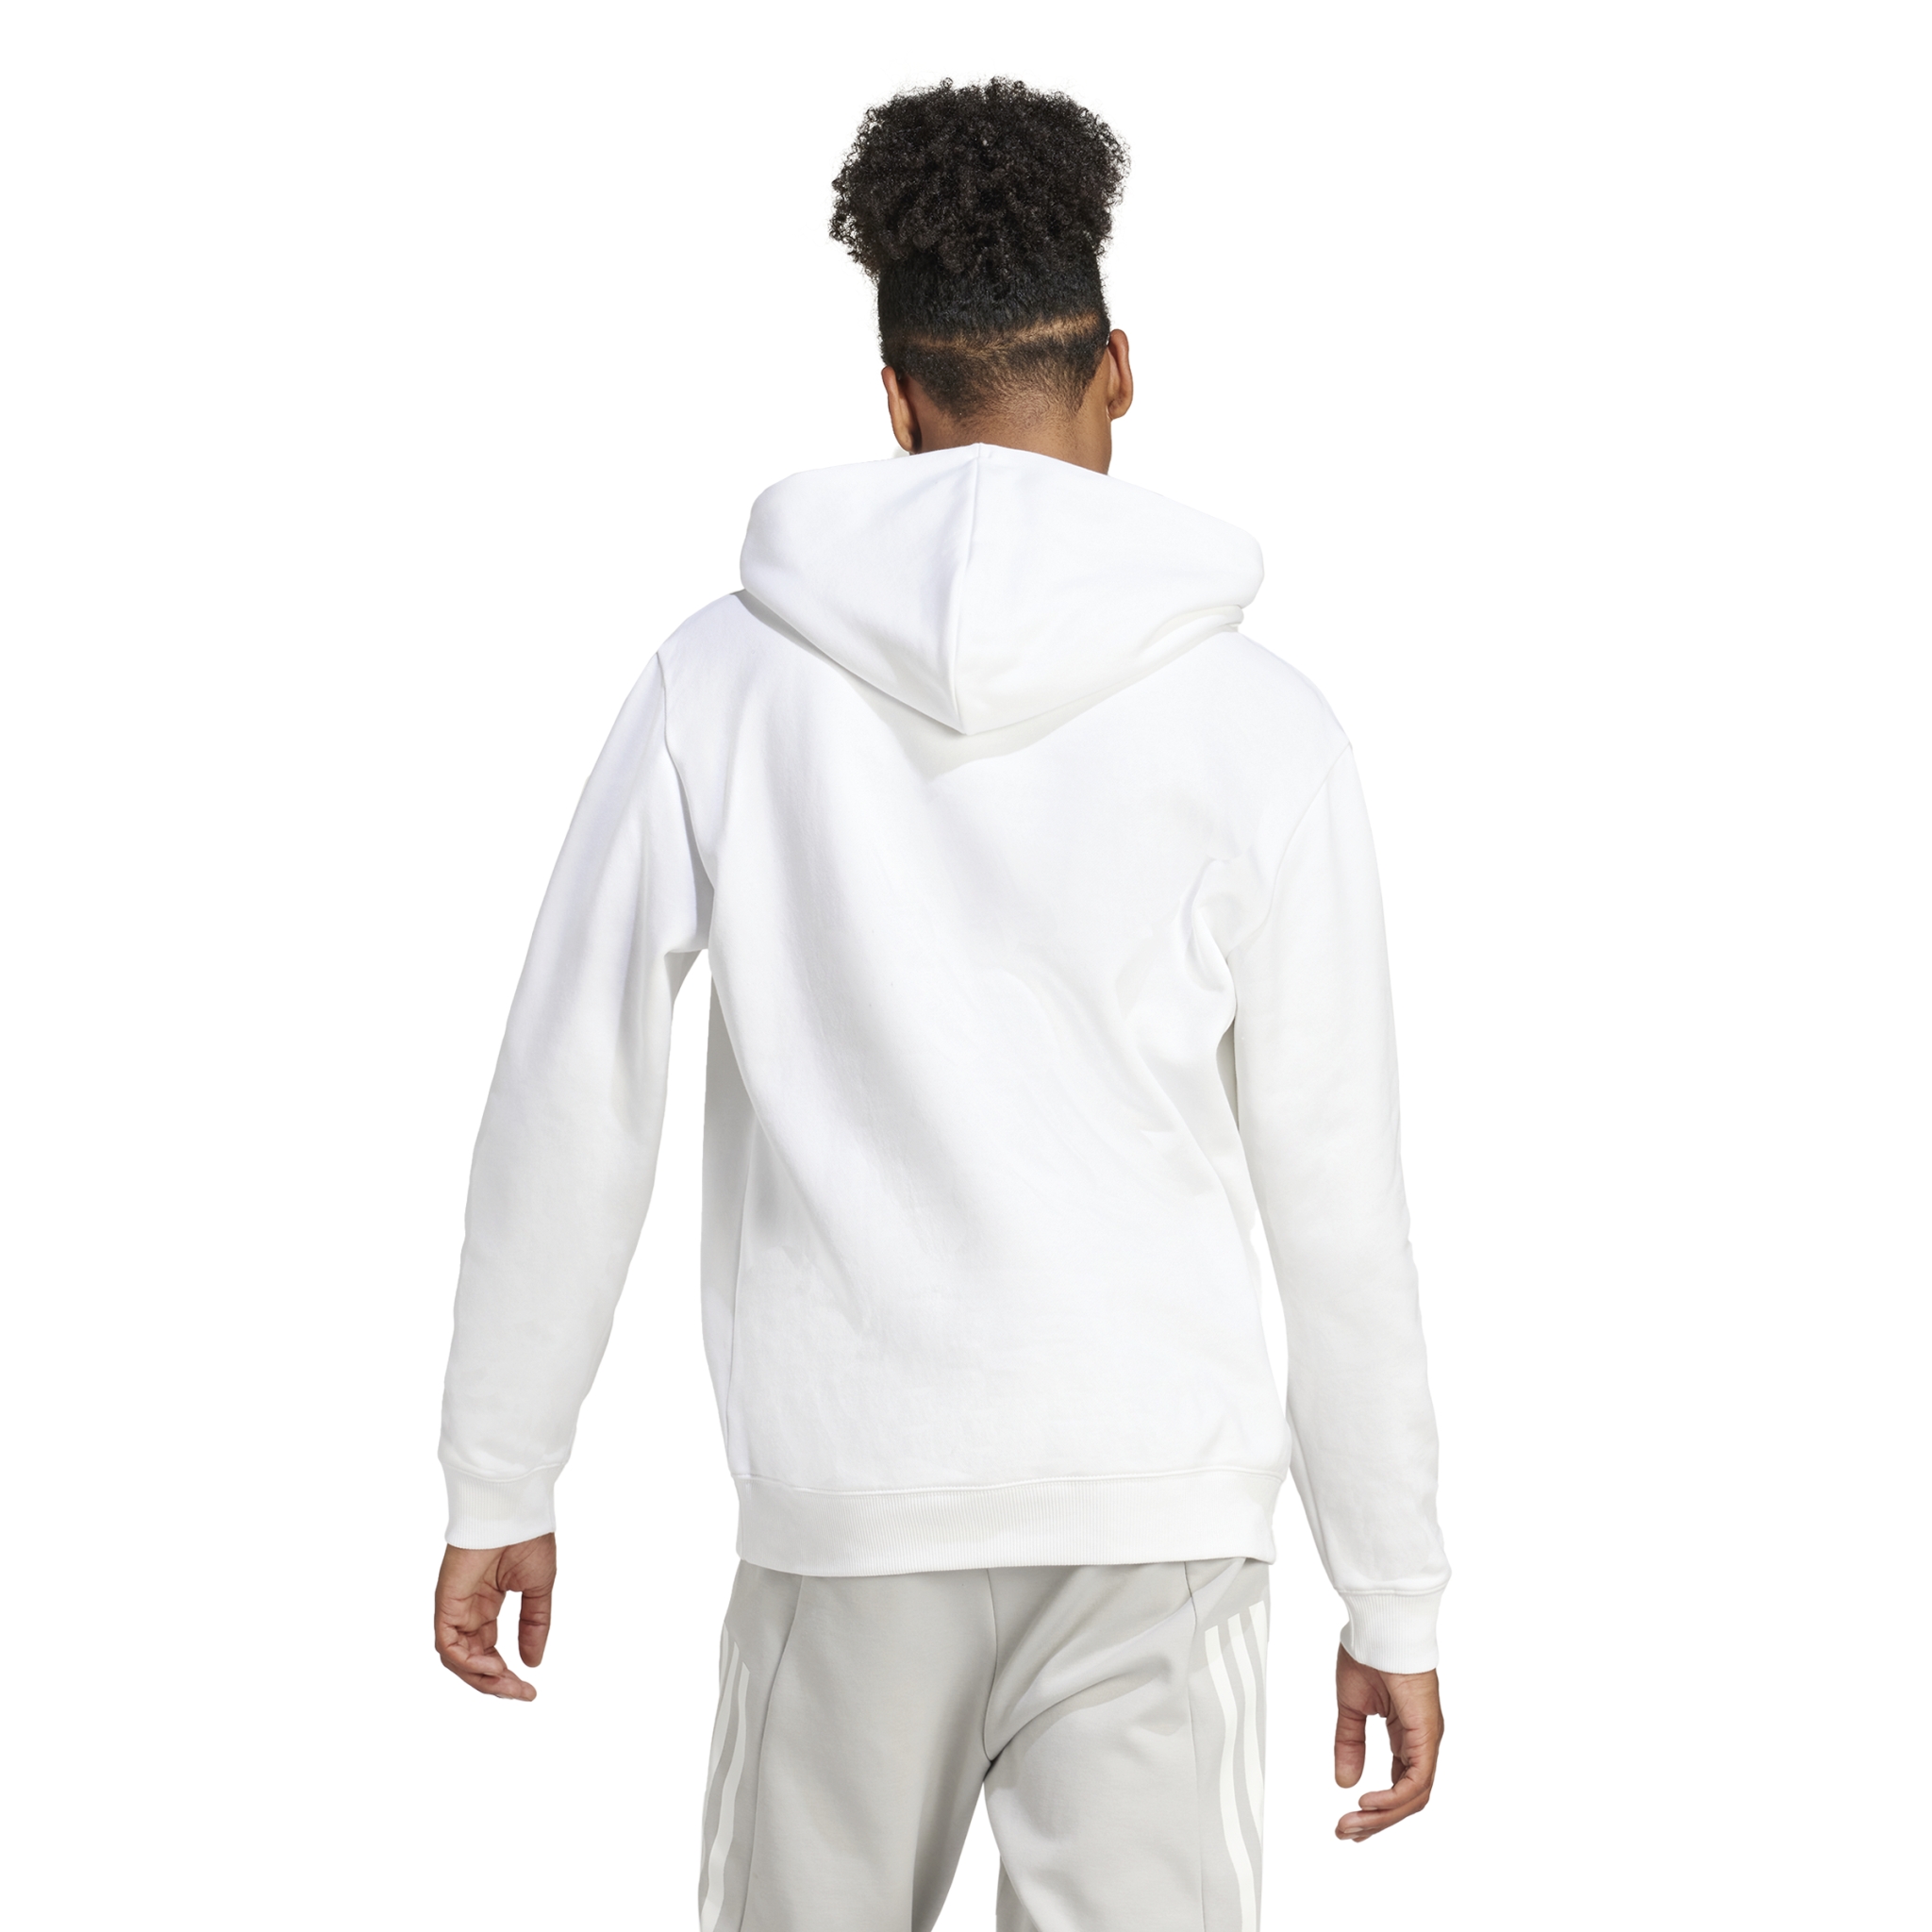 ADIDAS ALL SZN Graphic Hoodie 10737844